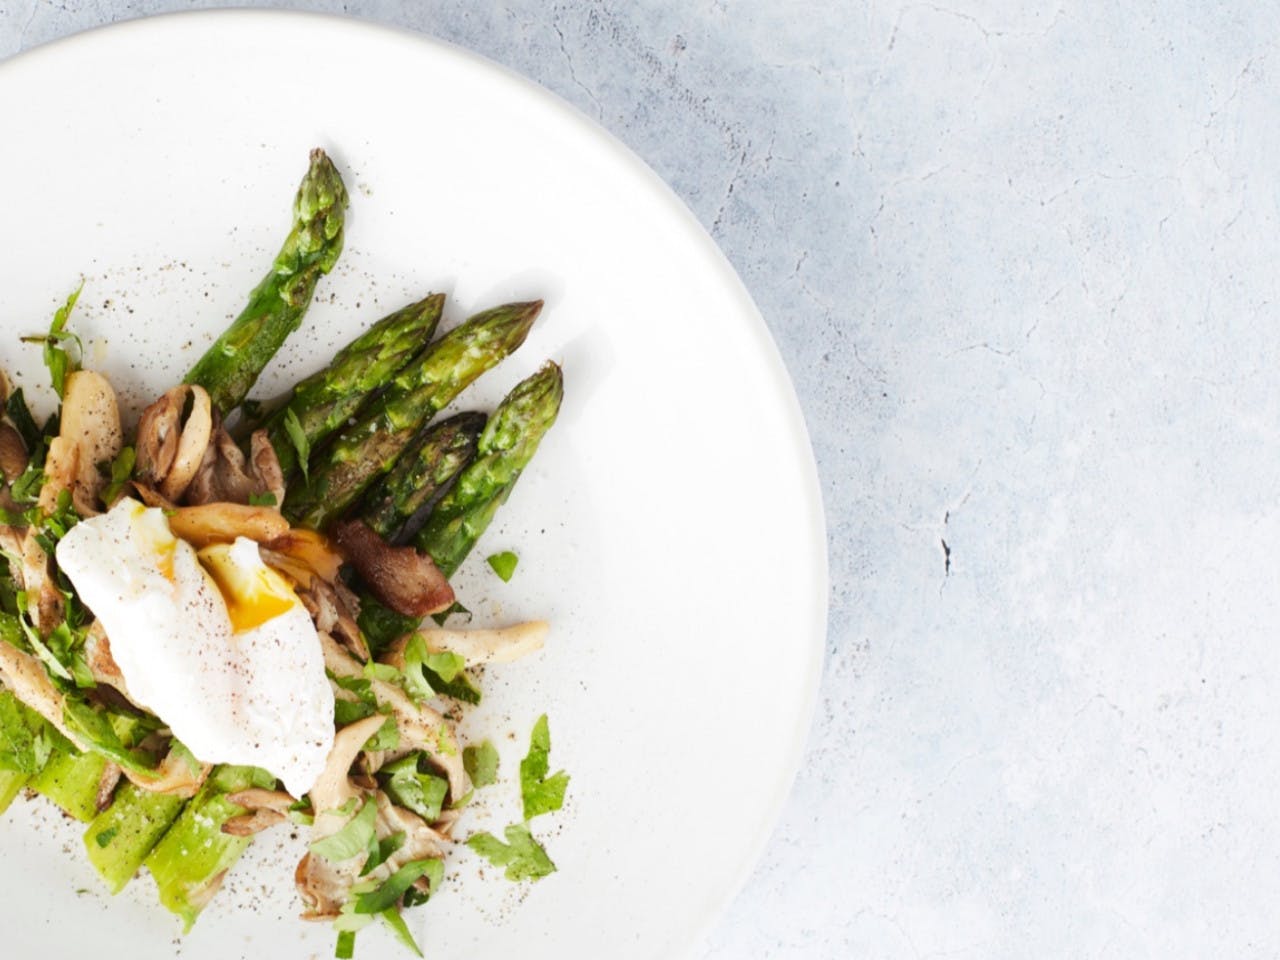 Fried green asparagus with oyster mushroom